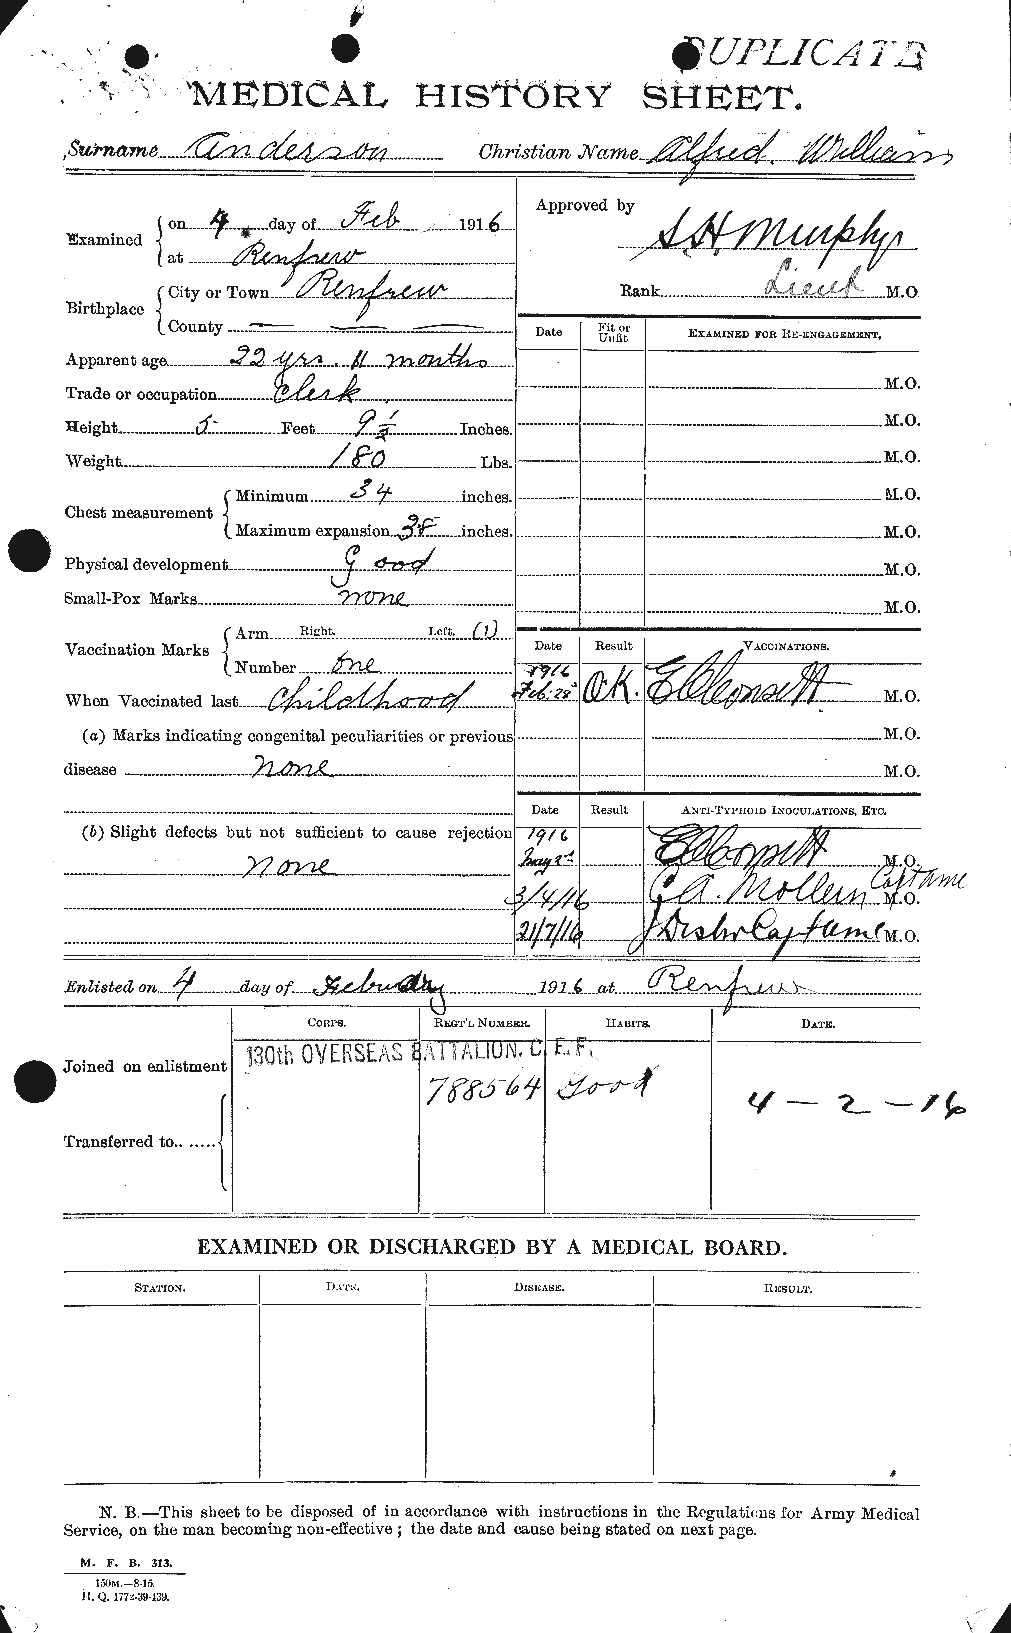 Personnel Records of the First World War - CEF 209448a